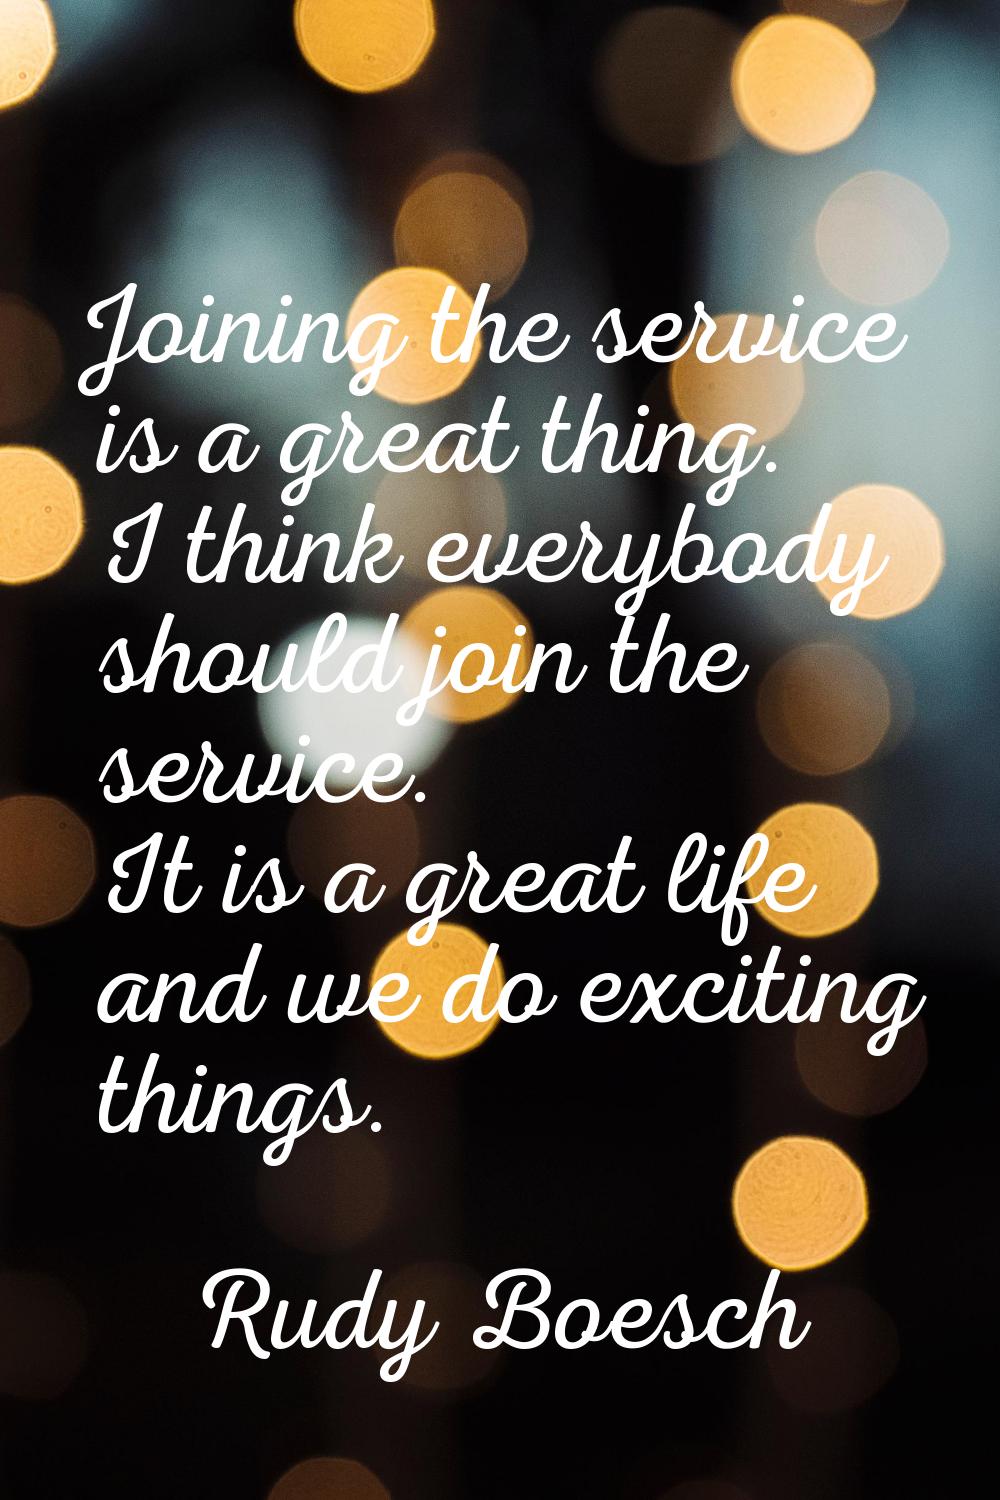 Joining the service is a great thing. I think everybody should join the service. It is a great life